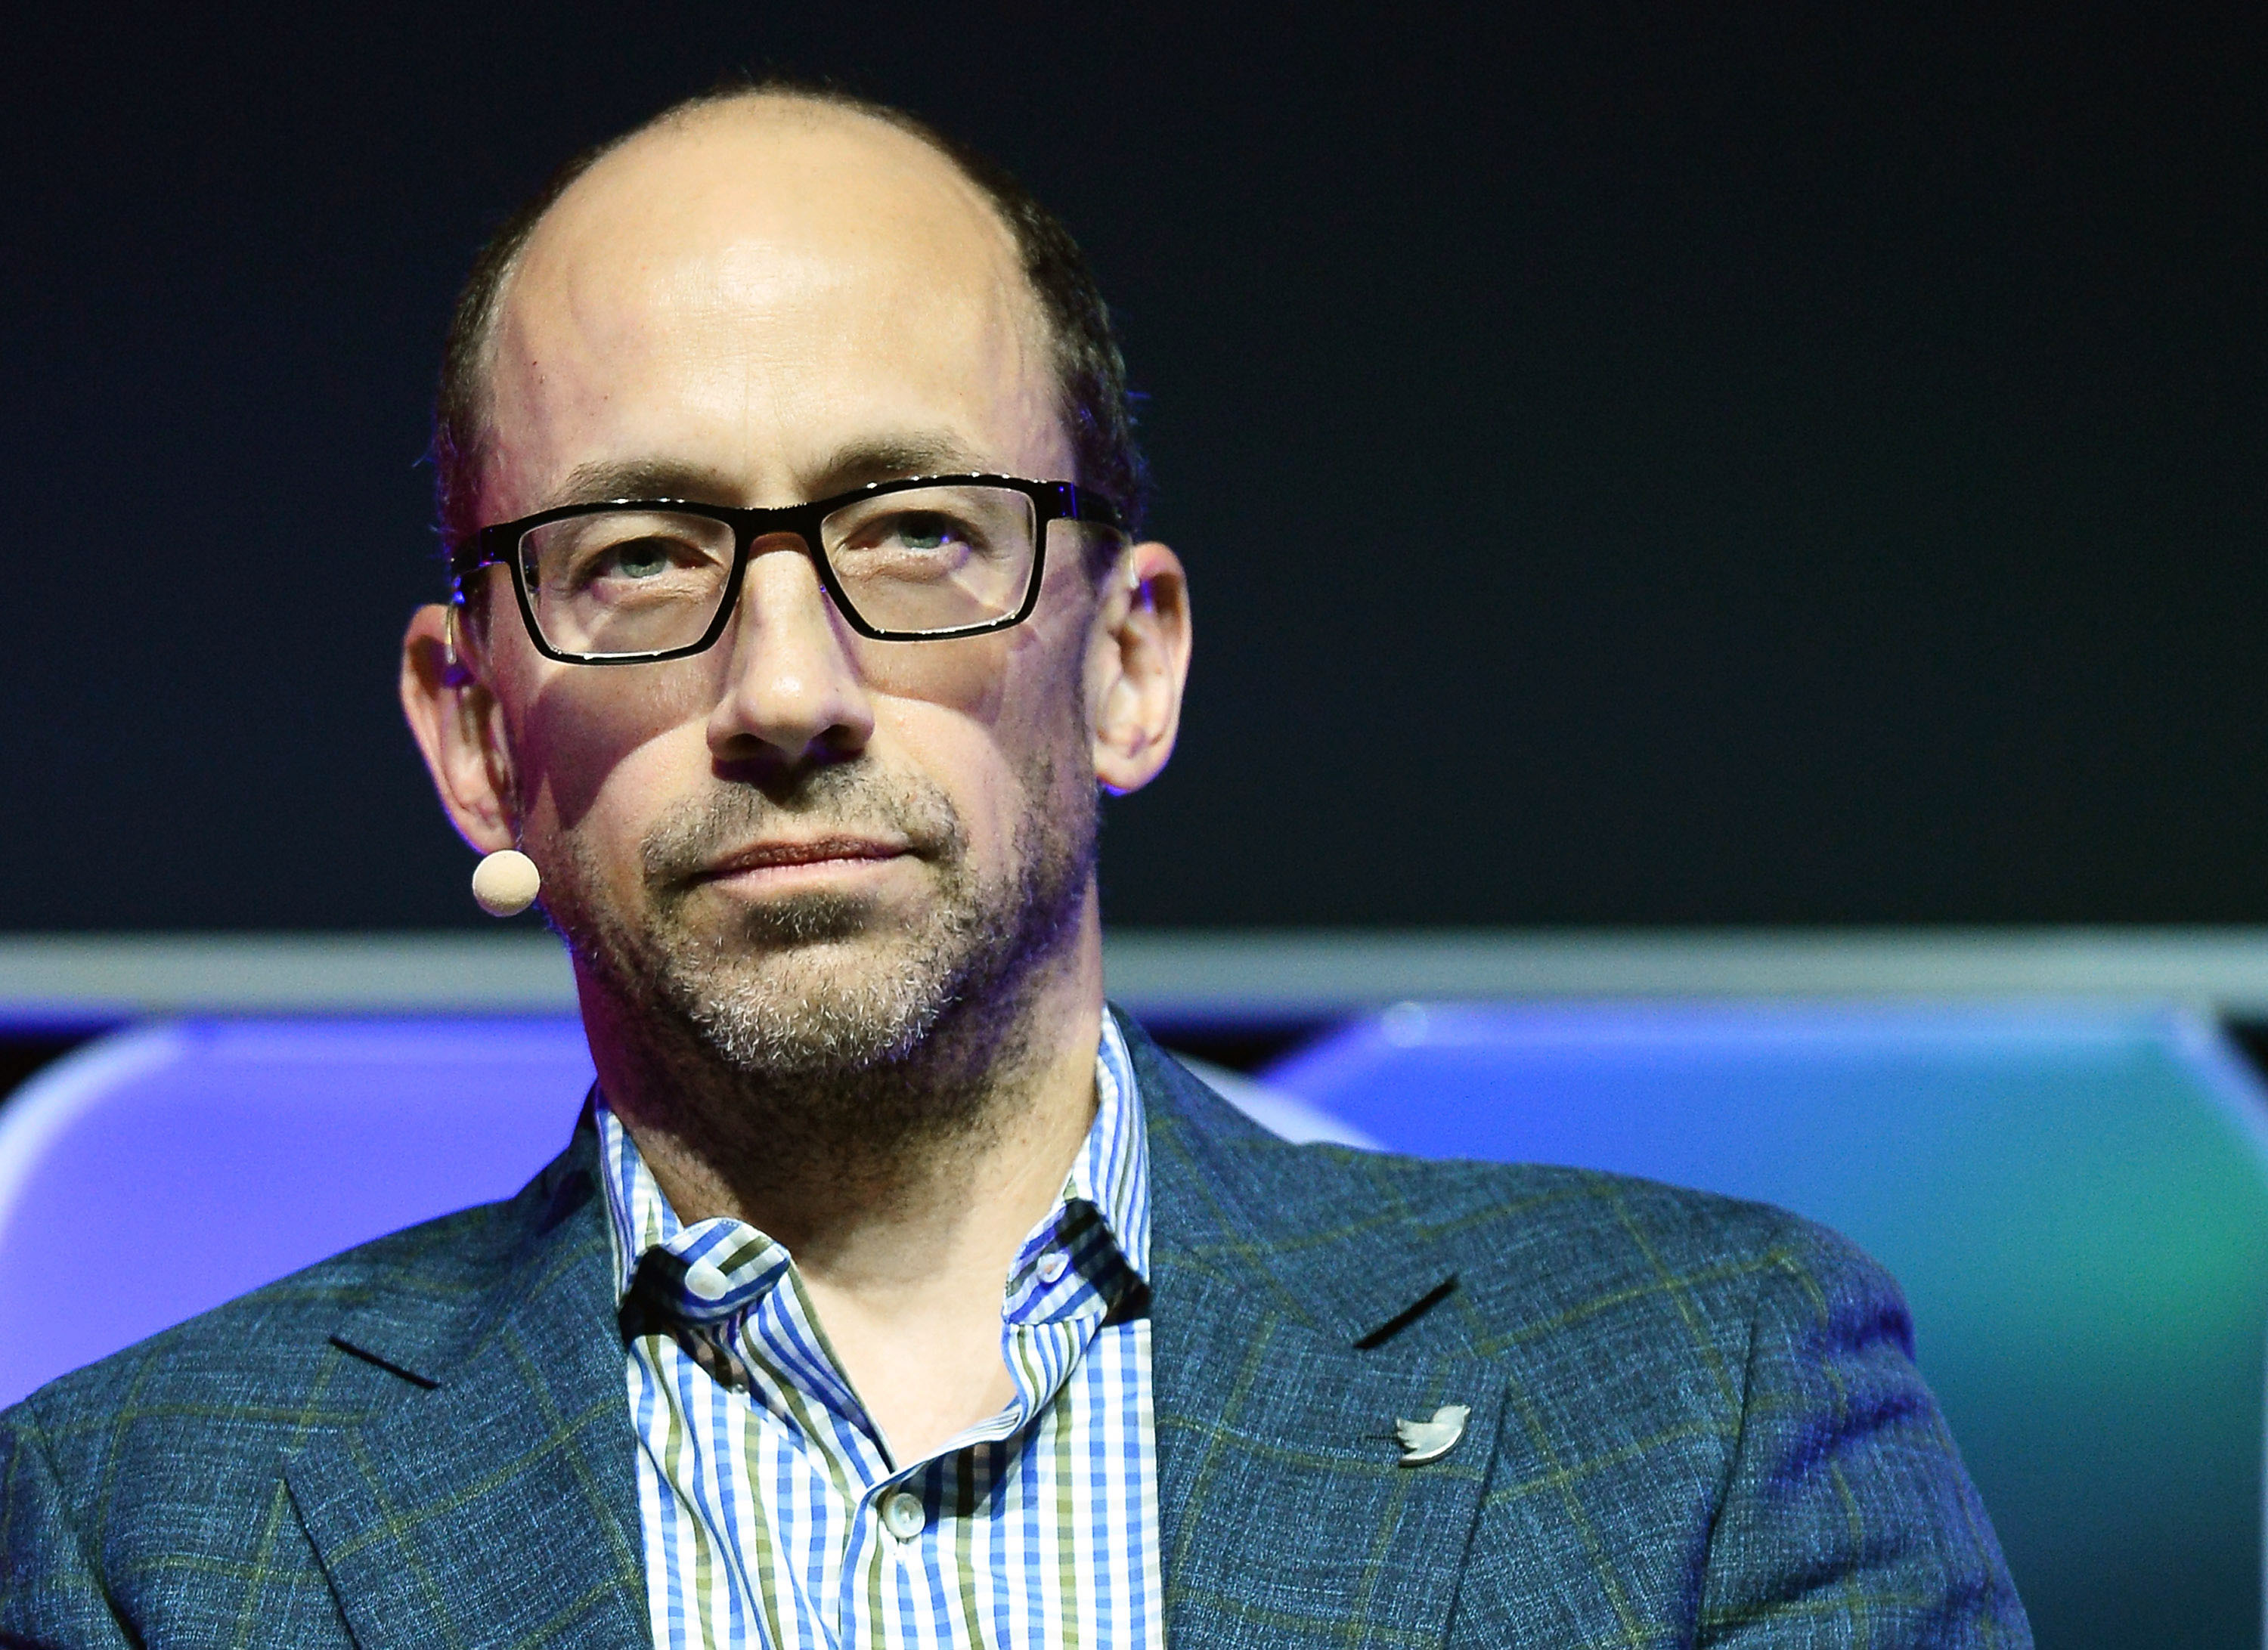 Twitter CEO Dick Costolo speaks during the Brand Matters keynote address at the 2014 International CES at The Las Vegas Hotel and Casino on Jan. 8, 2014 in Las Vegas. (Ethan Miller—Getty Images)